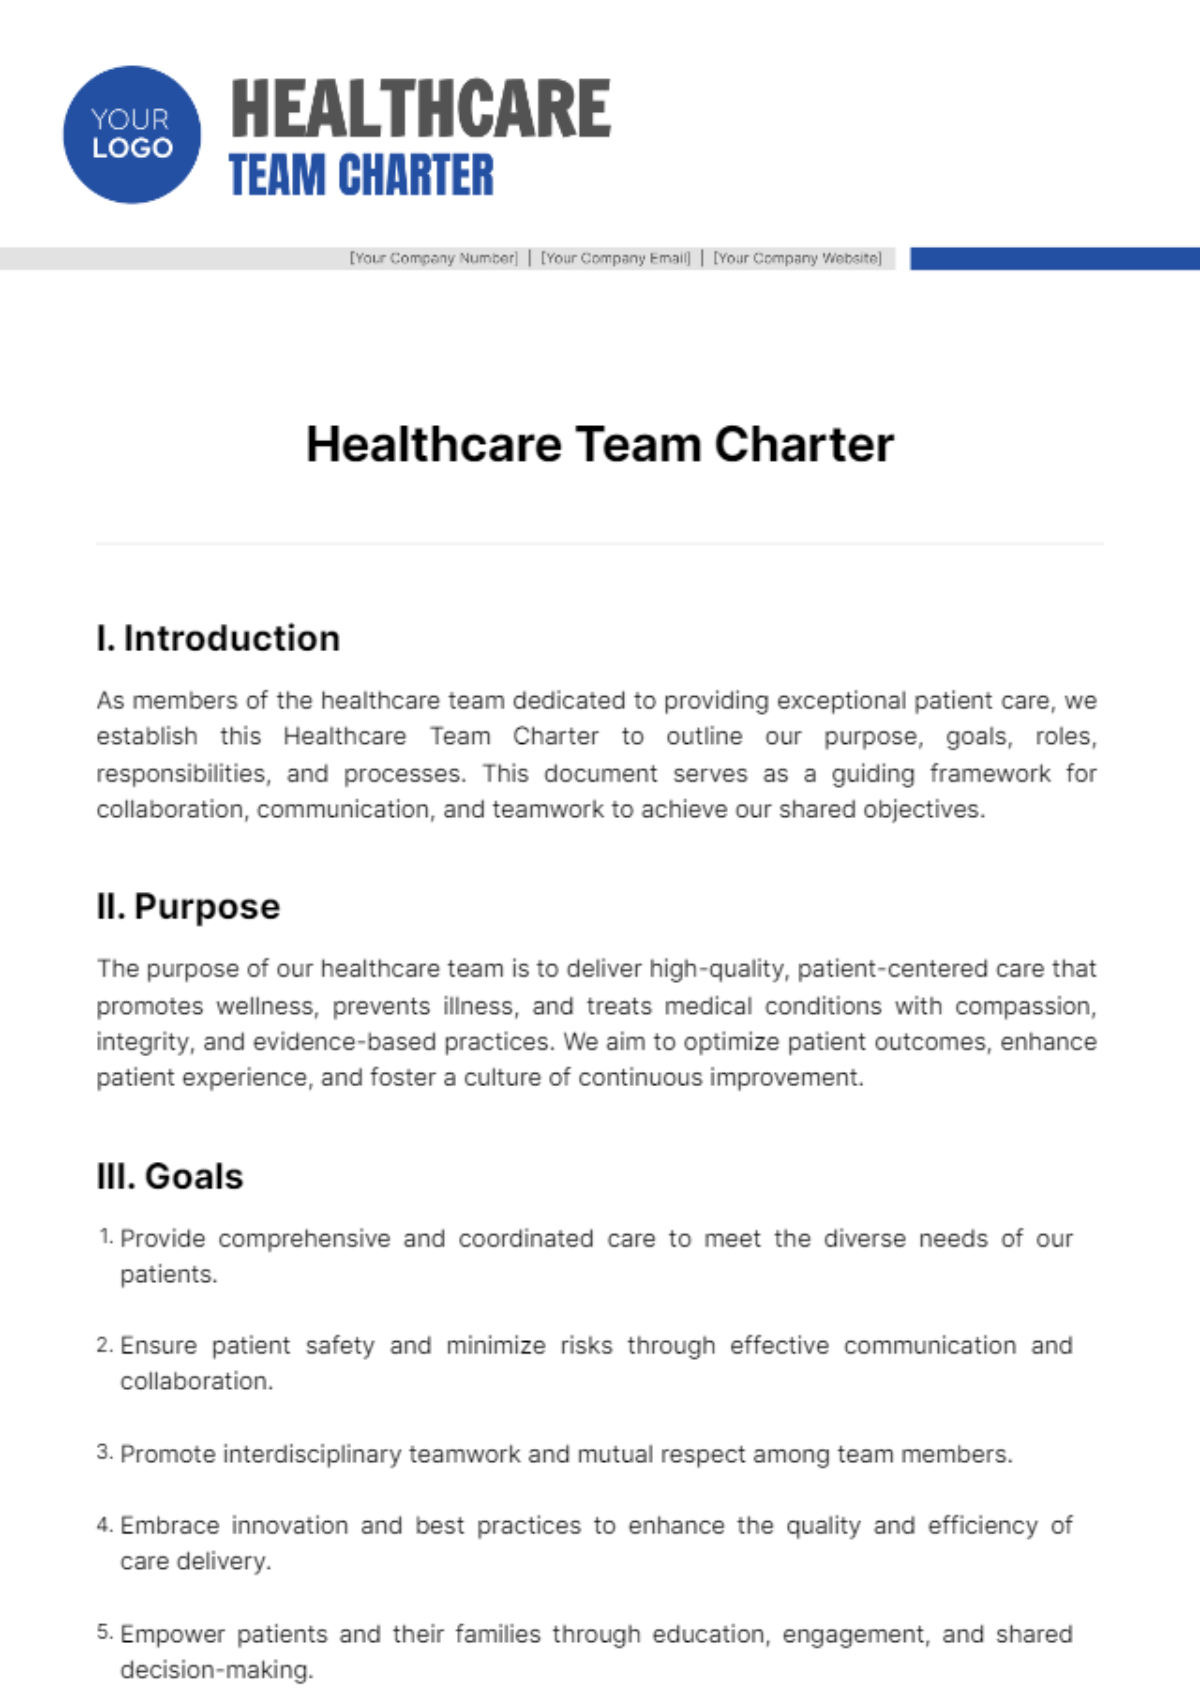 Healthcare Team Charter Template